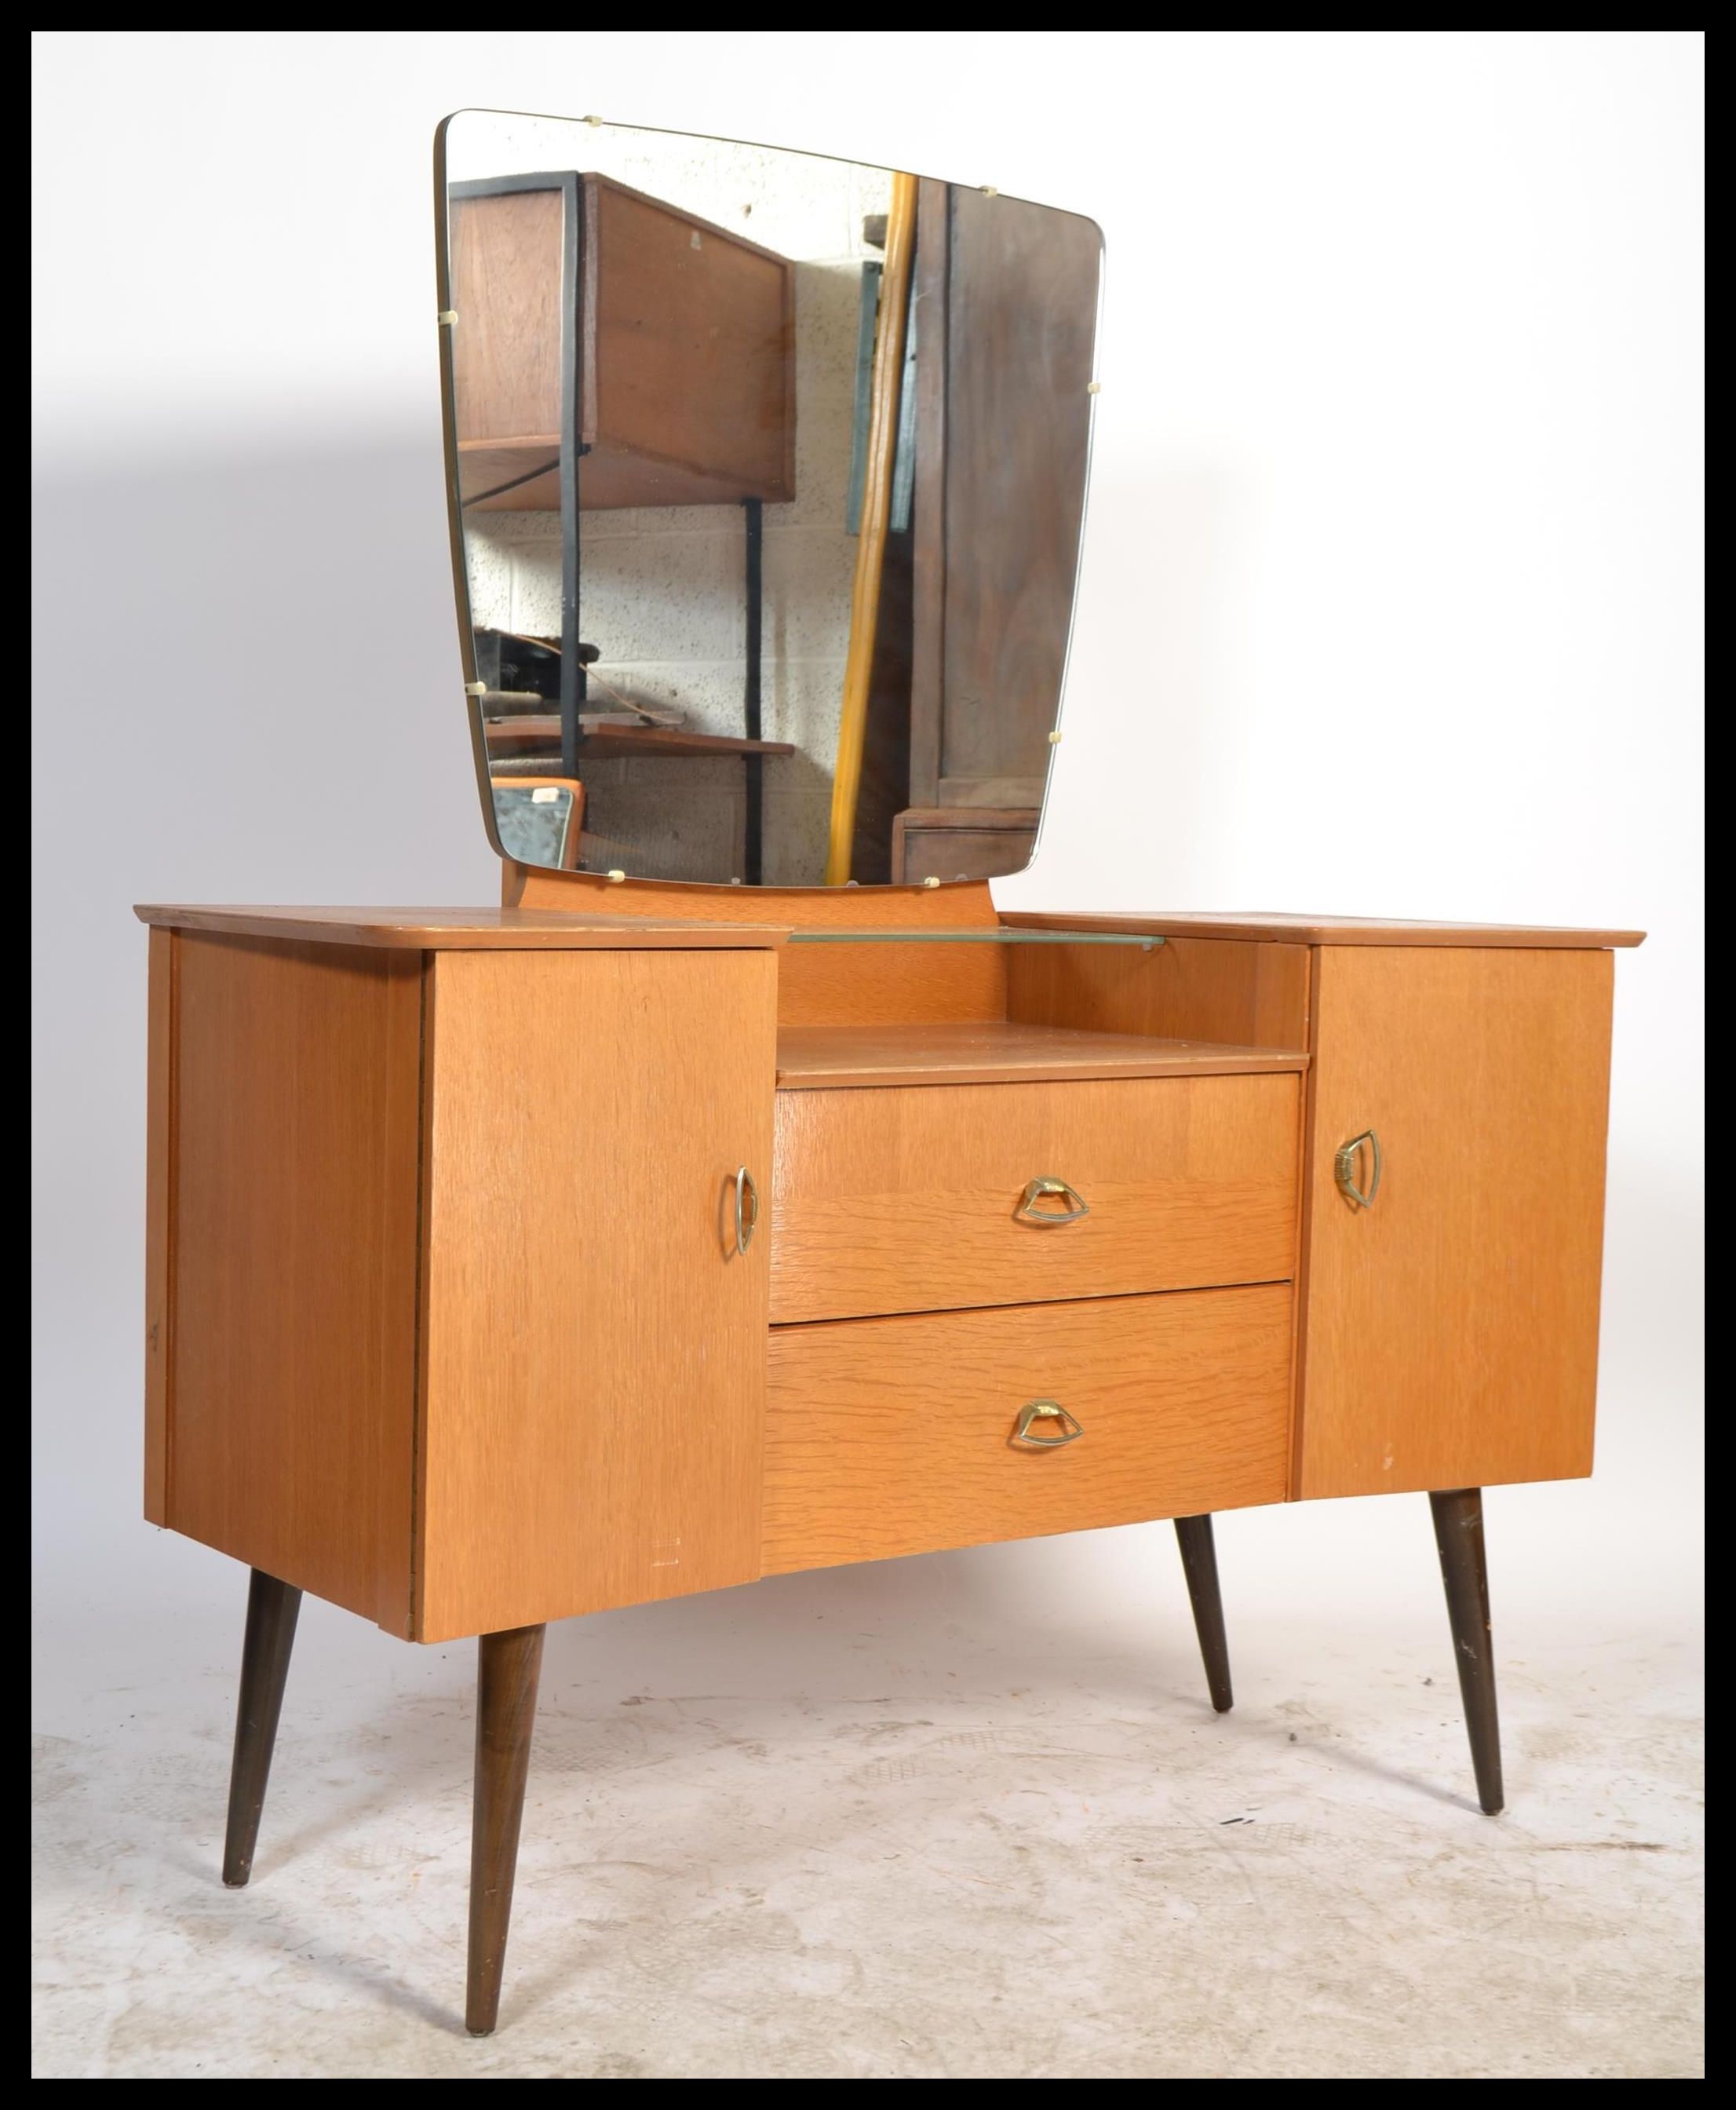 A 1960's retro oak drop centre dressing table being raised on tapering legs with a large mirror of